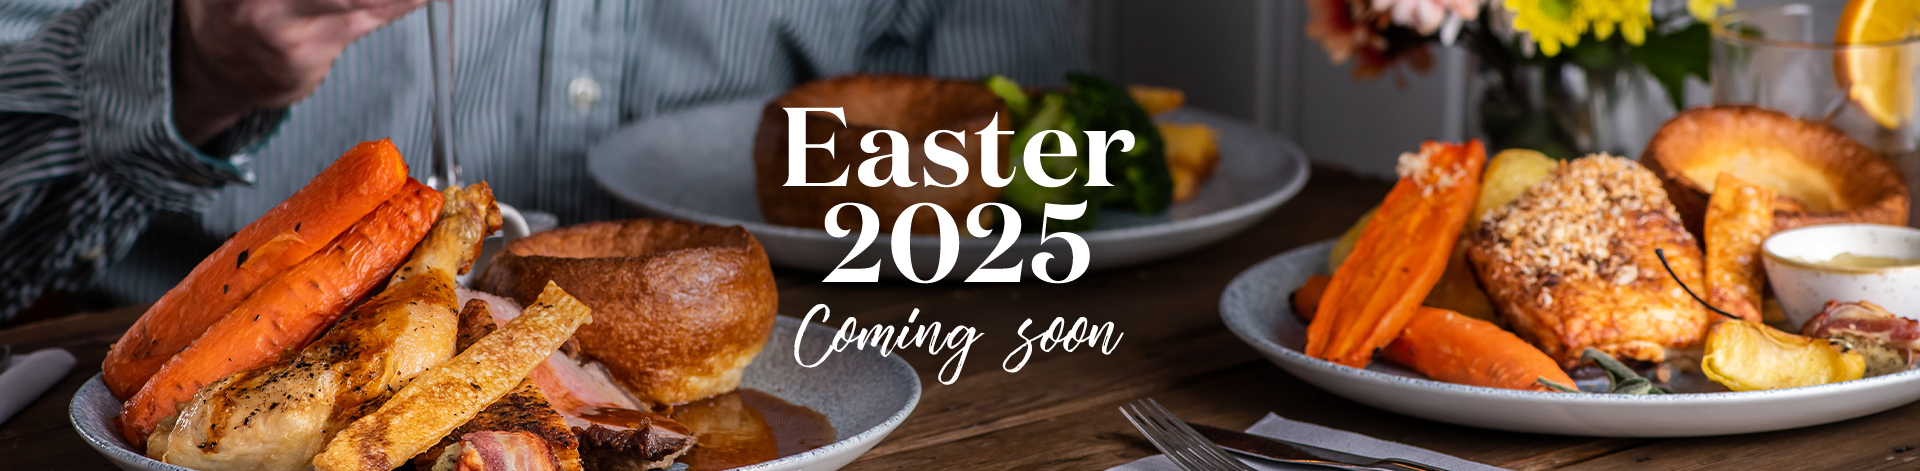 Easter at The Hesketh Arms in Southport